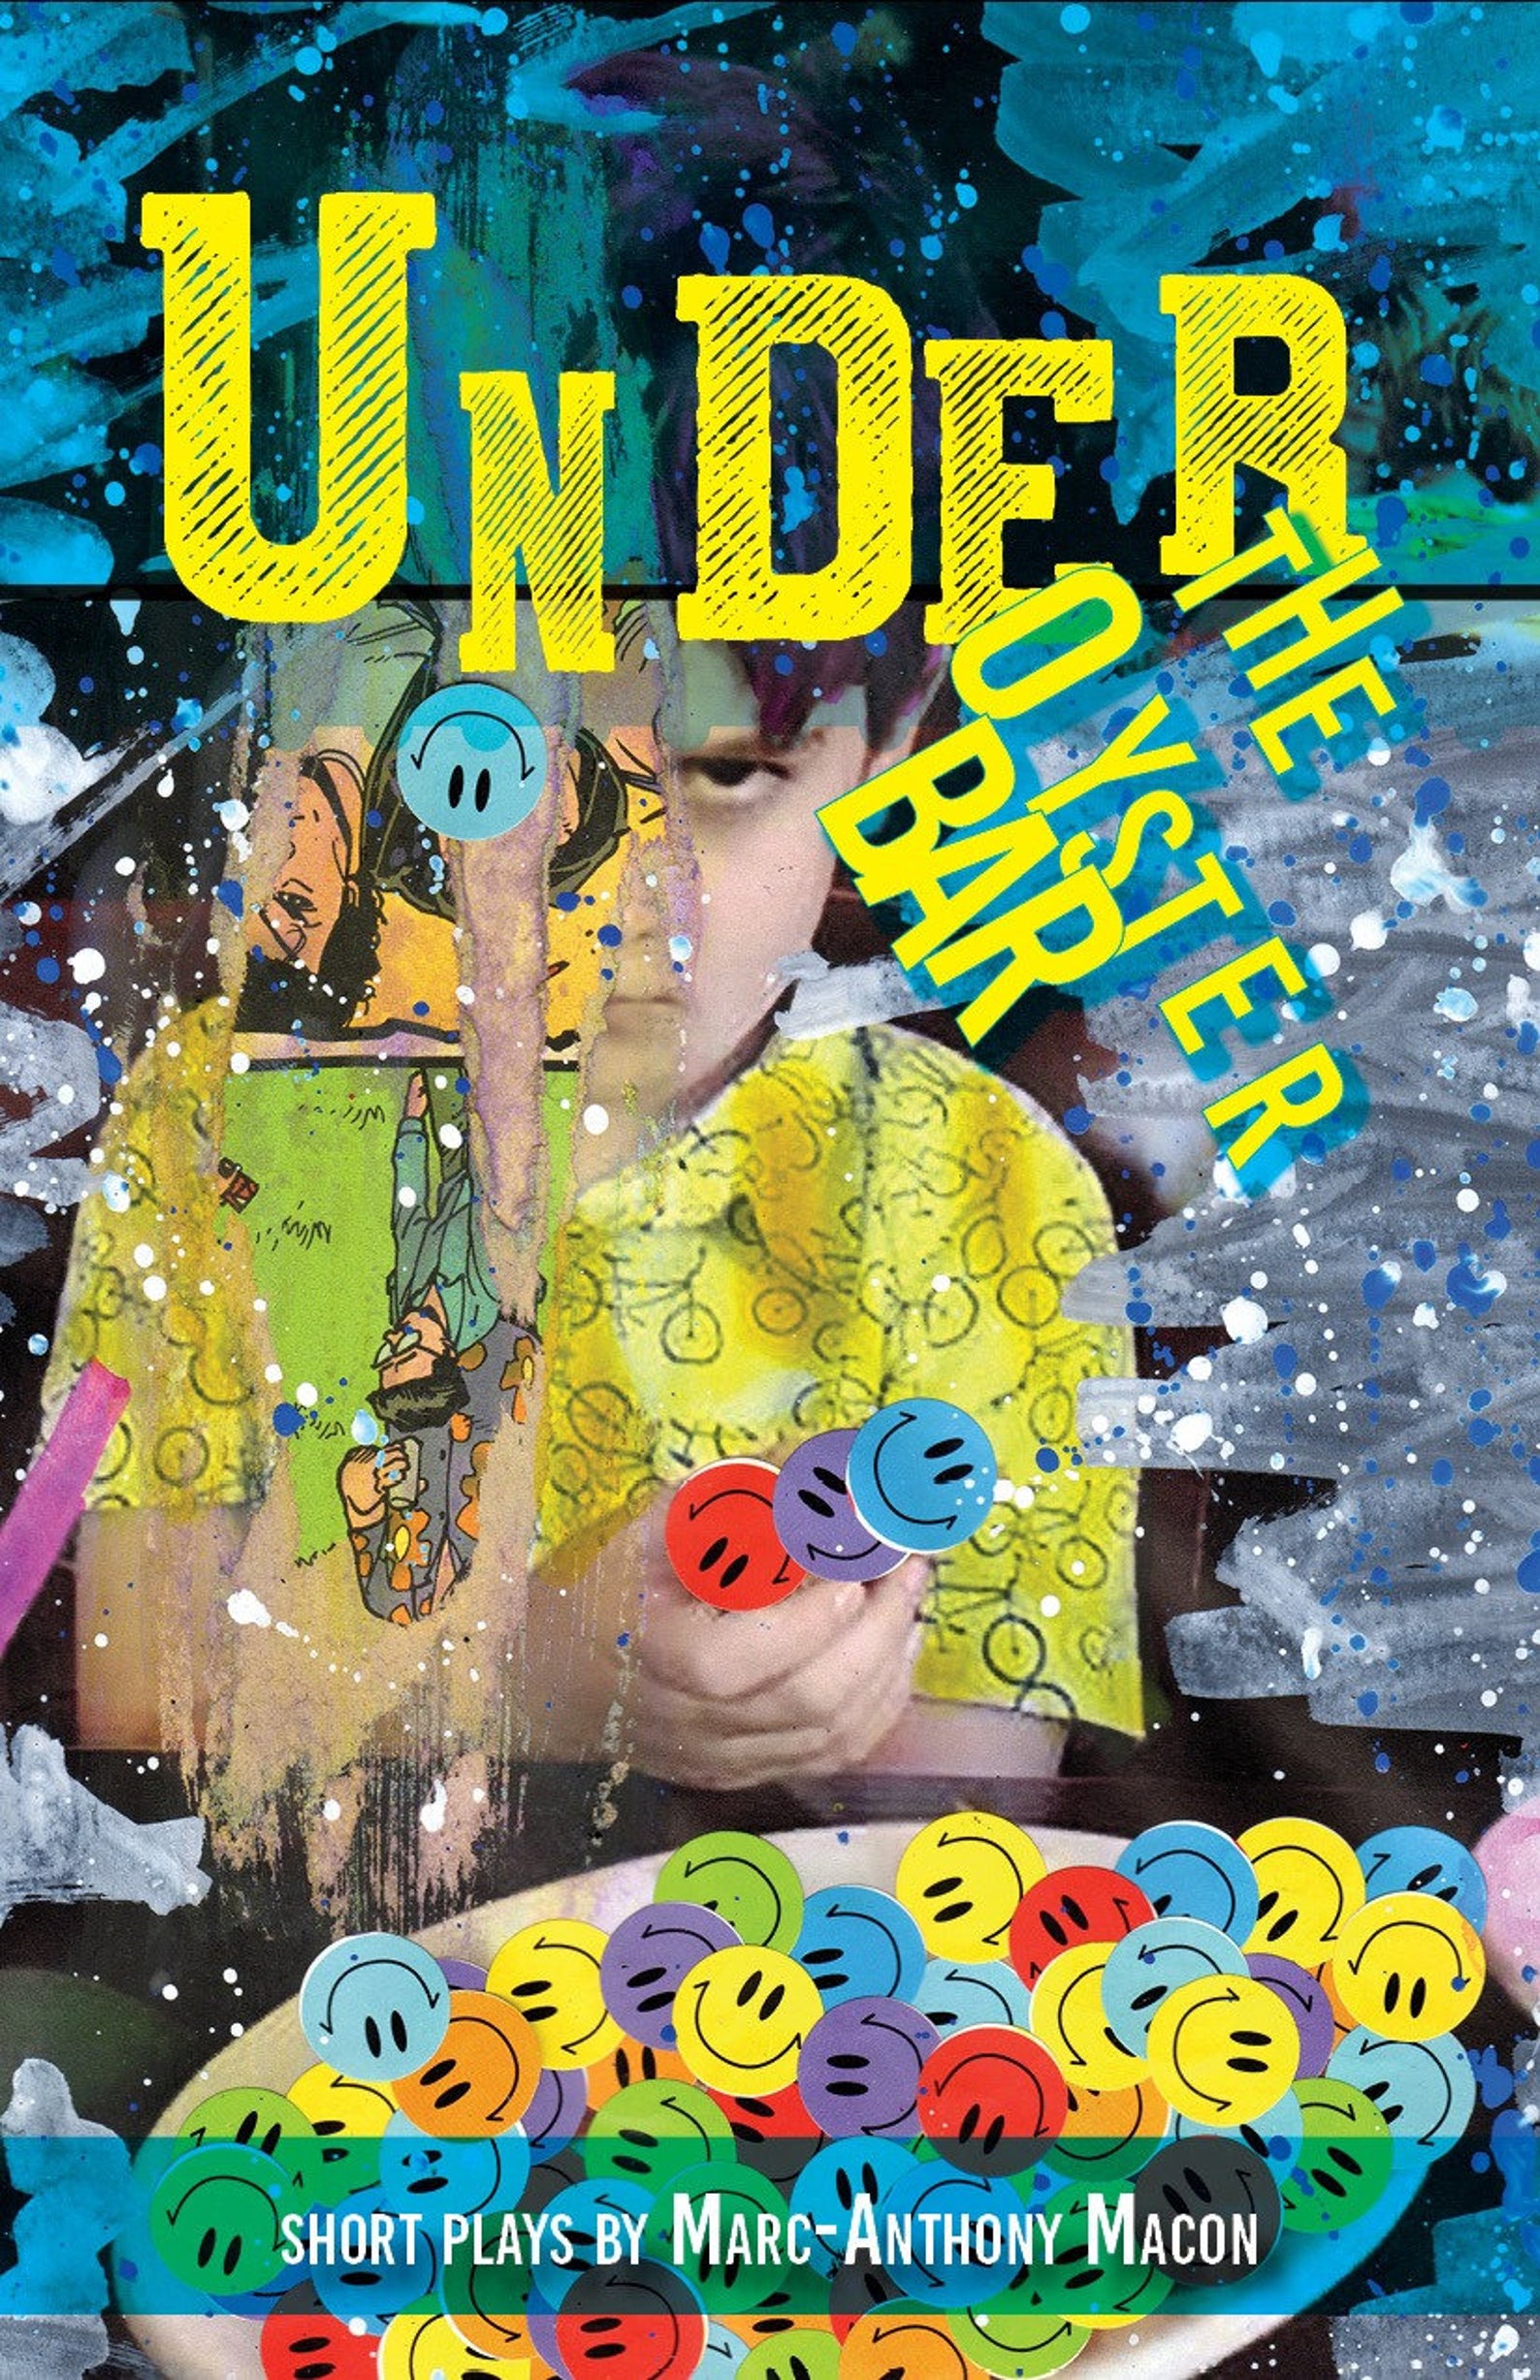 Front cover of Under the Oyster Bar with collage image of boy at bowl of multicolored smiley faces. Photo from the author's Etsy site.